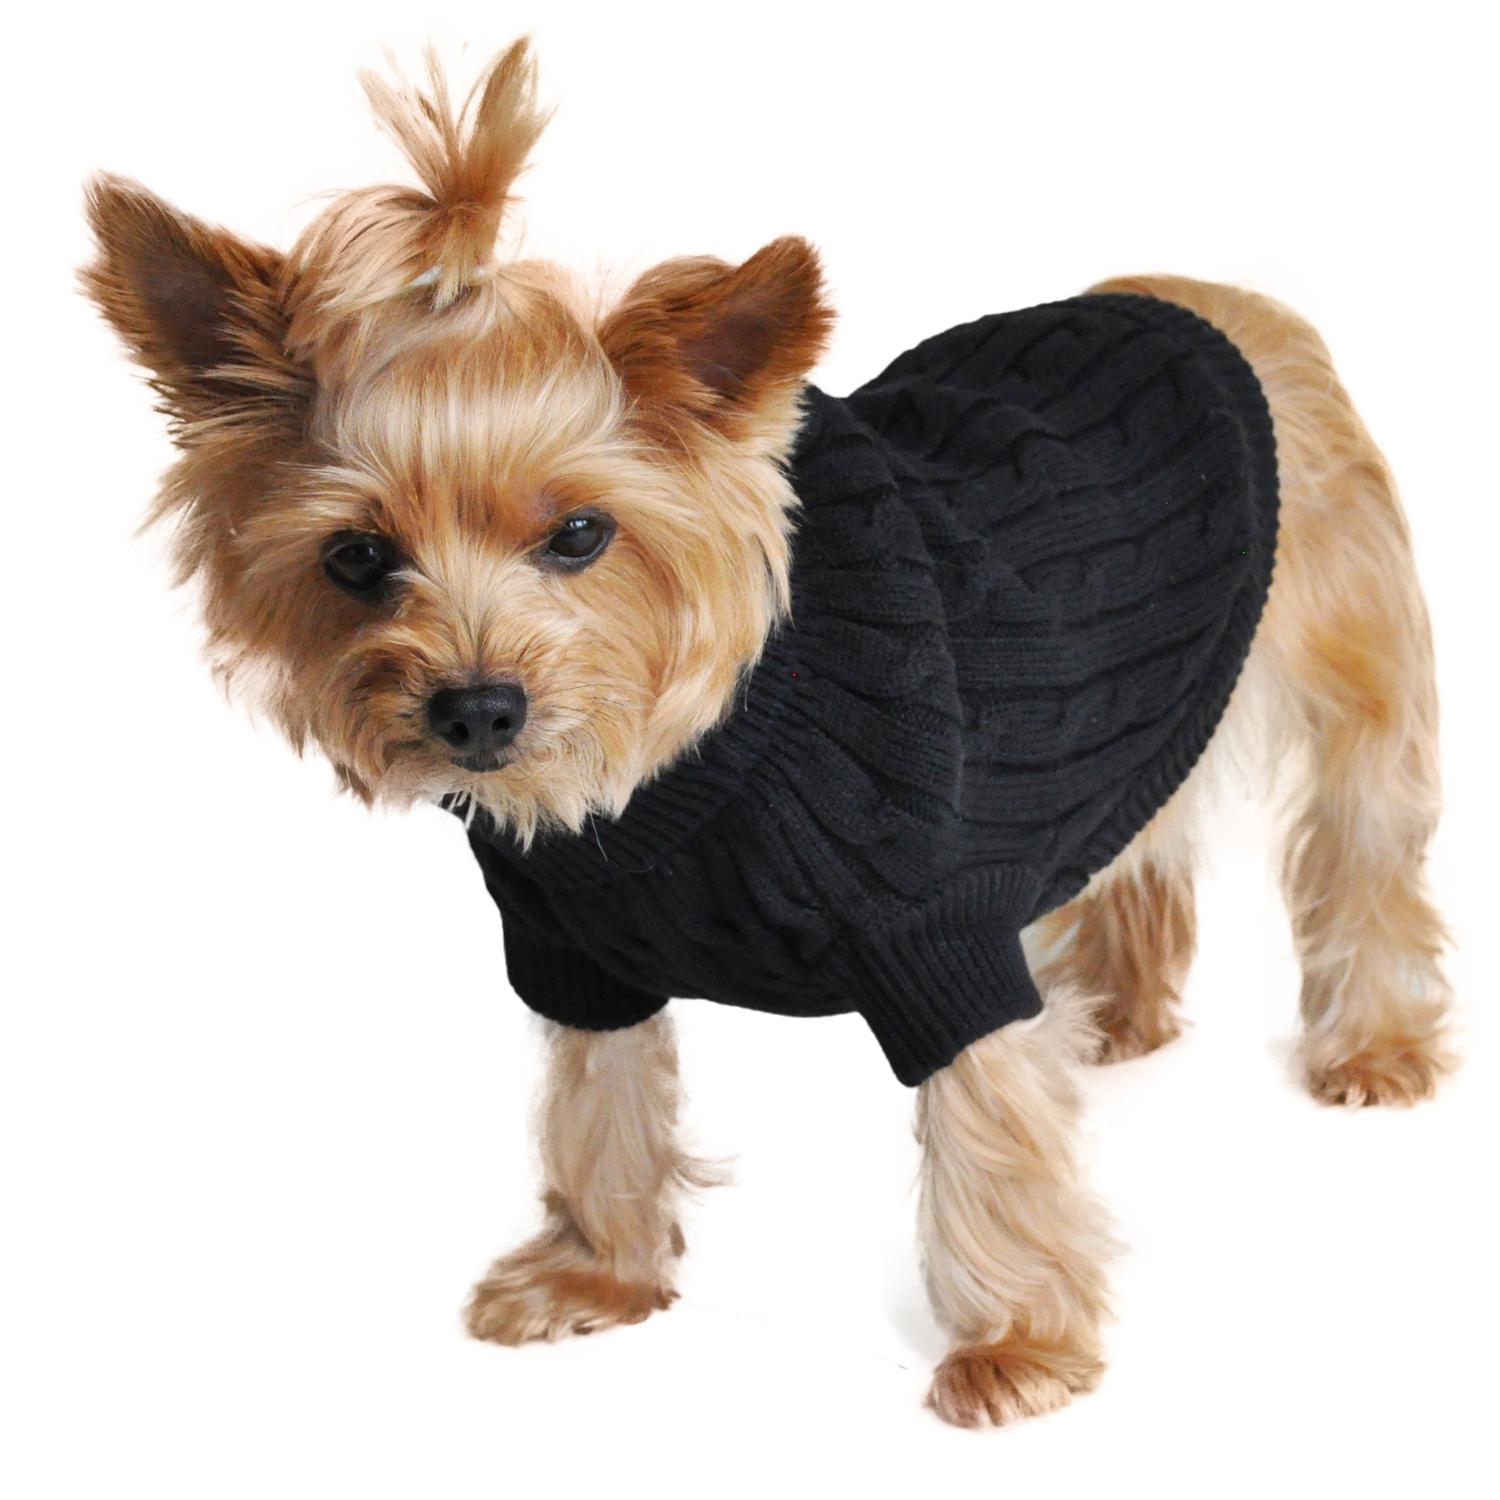 Cable Knit Dog Sweater by Doggie Design - Jet Black